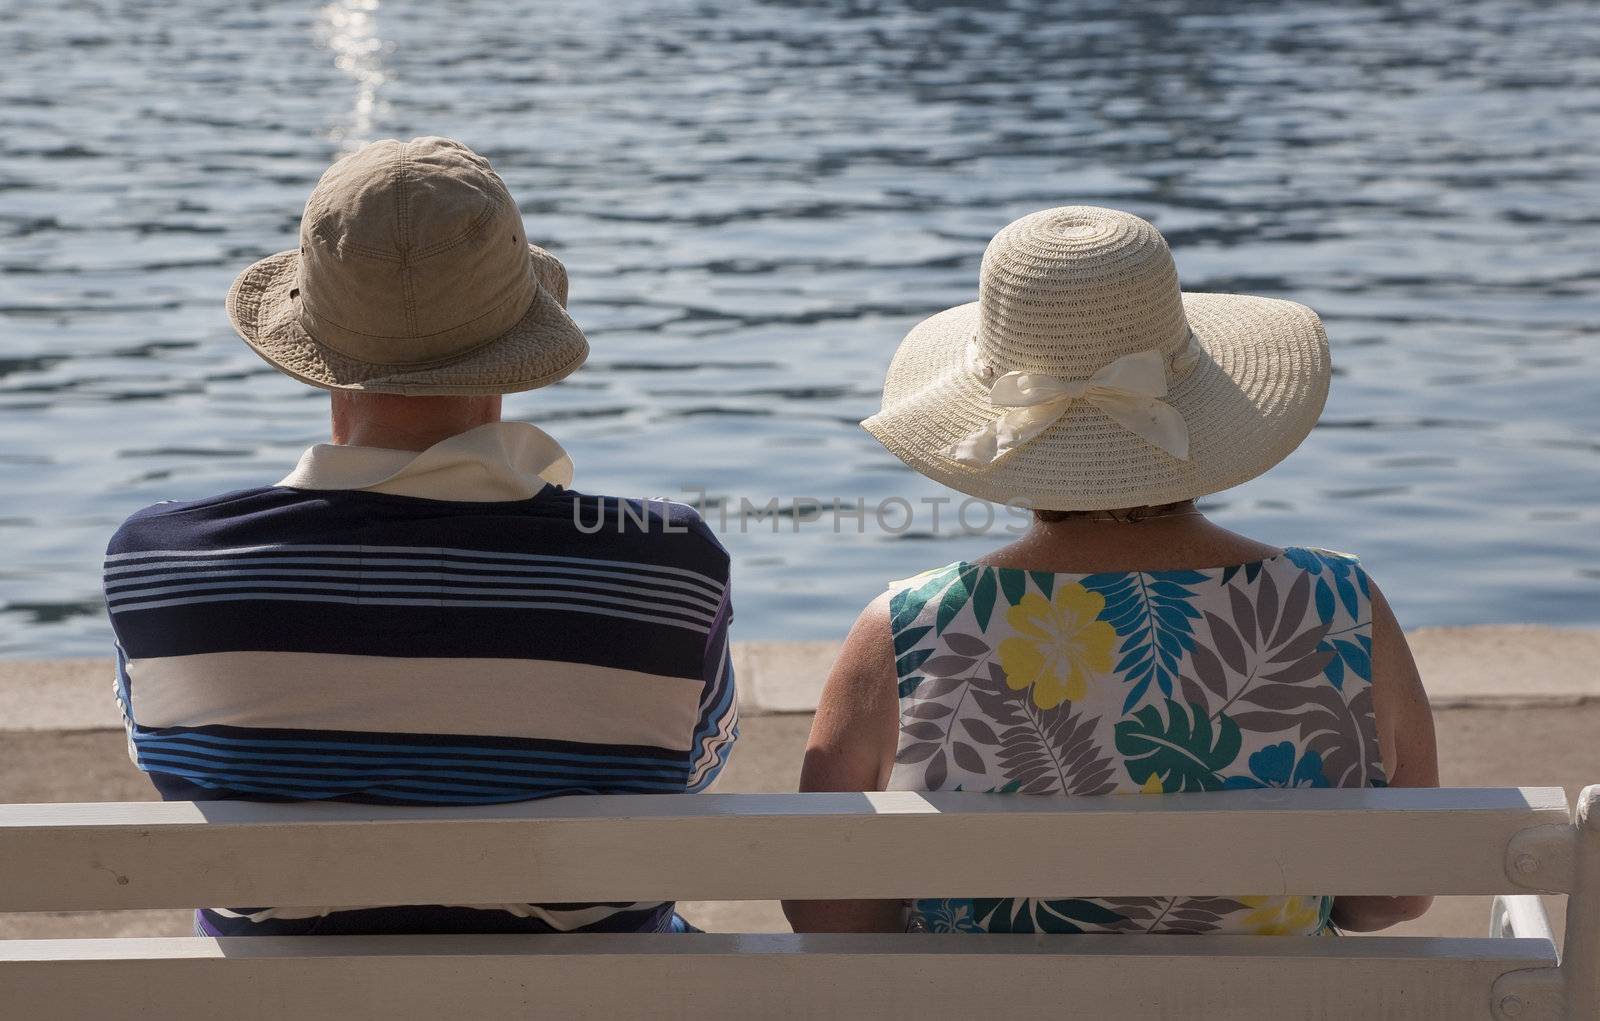 Mature couple on bench enjoying the sun and their vacation in Croatia.